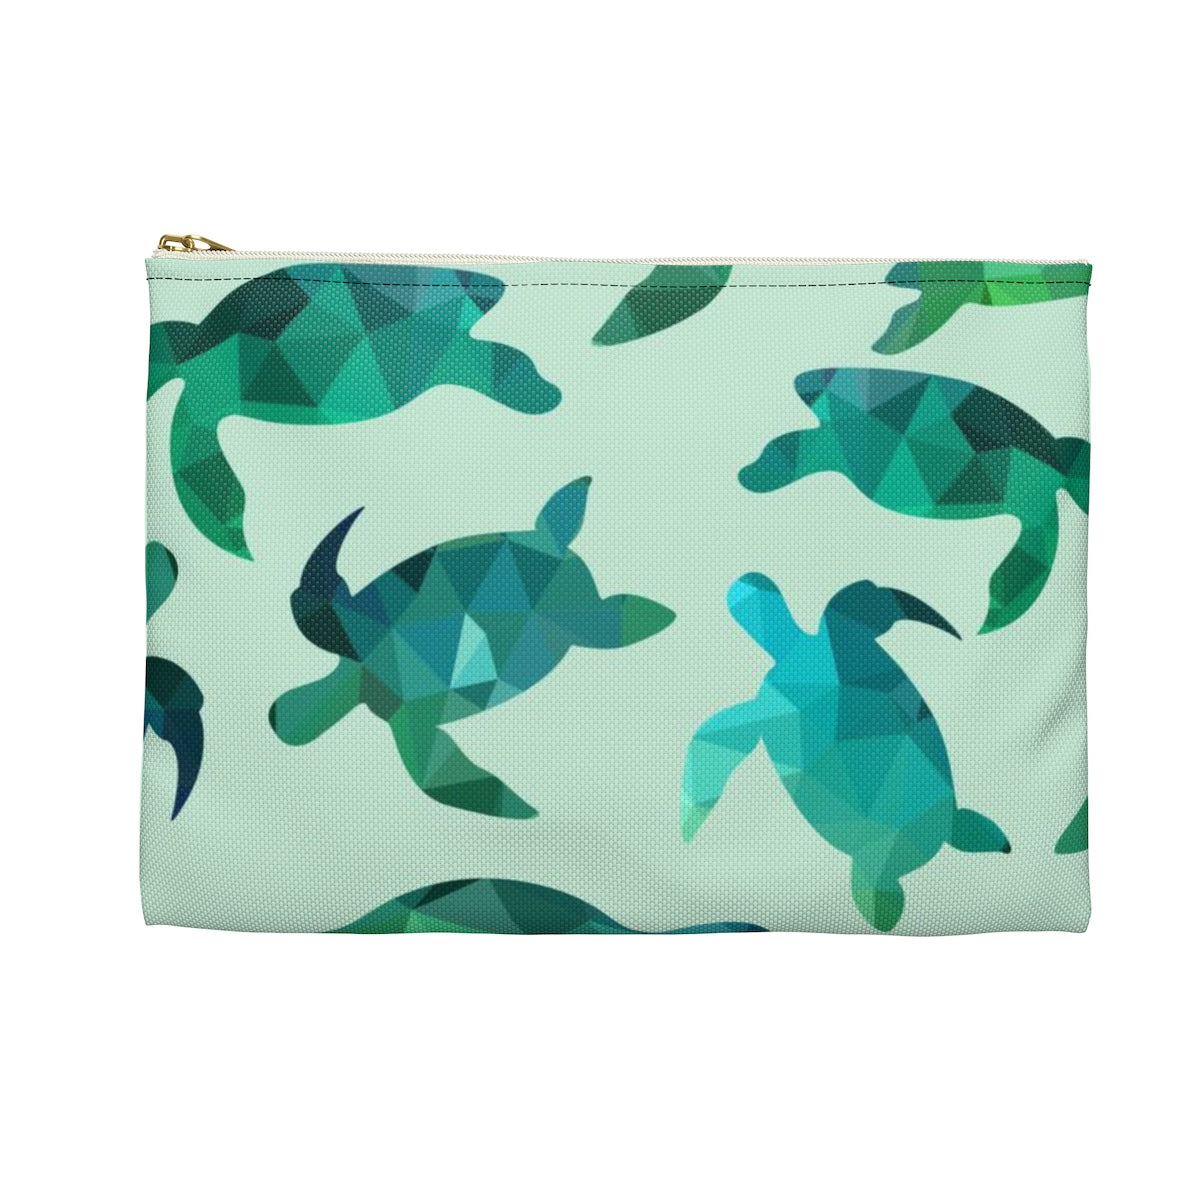 Sea Turtle Makeup Bag, Small Gifts for Her, Green Cosmetic Organizer, toiletry Travel Accessory Zip Pouch Zipper Clutch Pencil Case Starcove Fashion